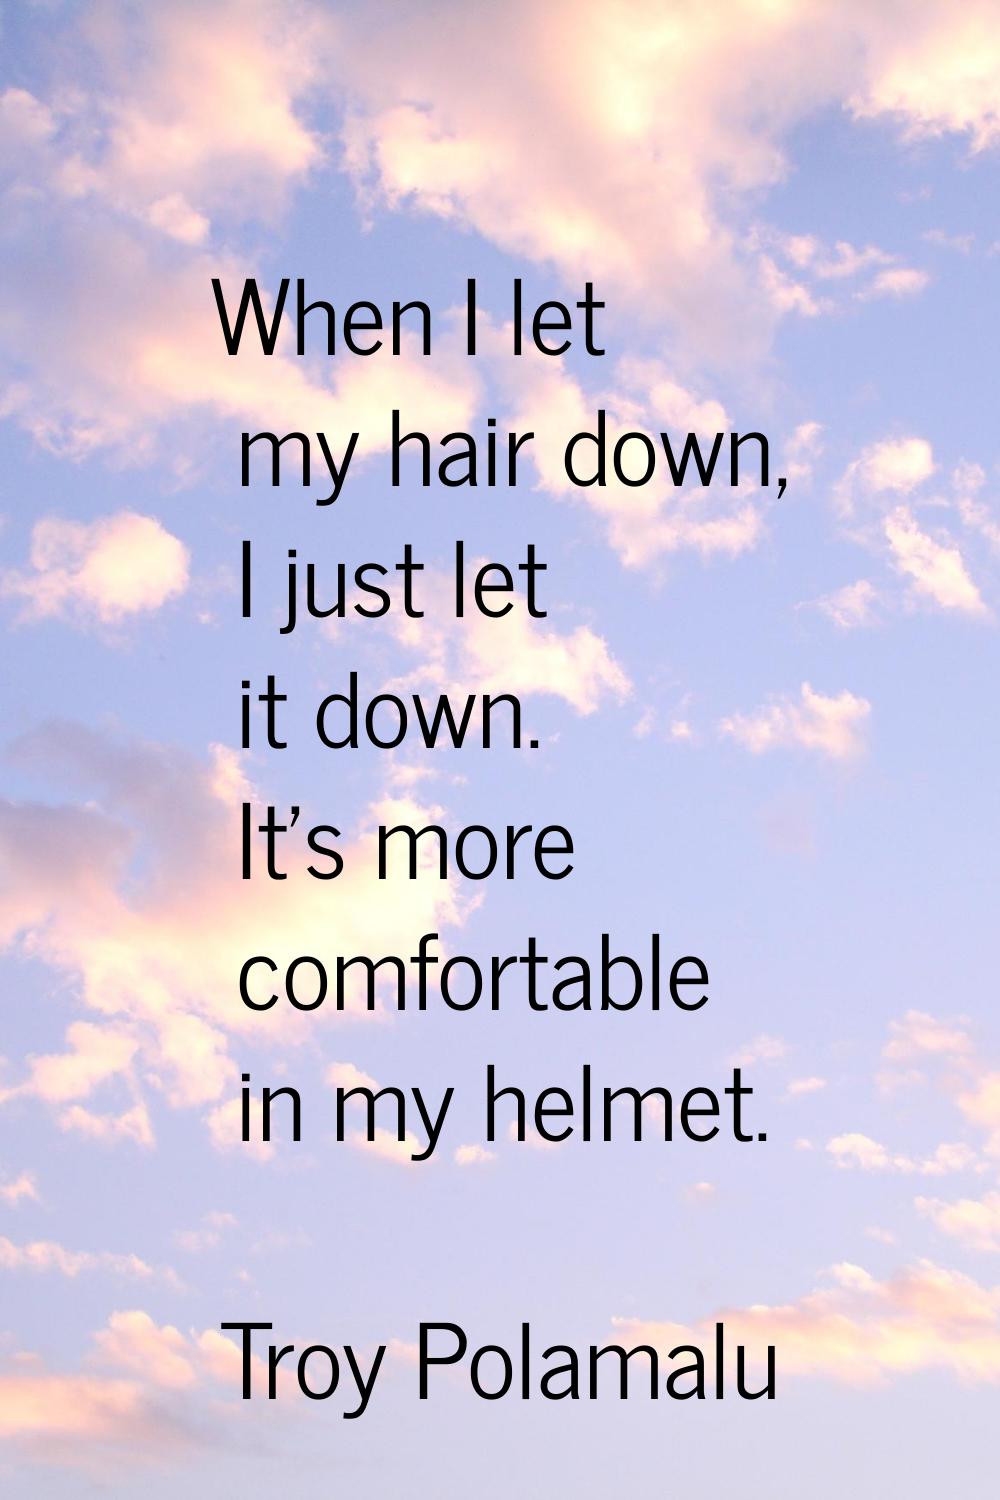 When I let my hair down, I just let it down. It's more comfortable in my helmet.